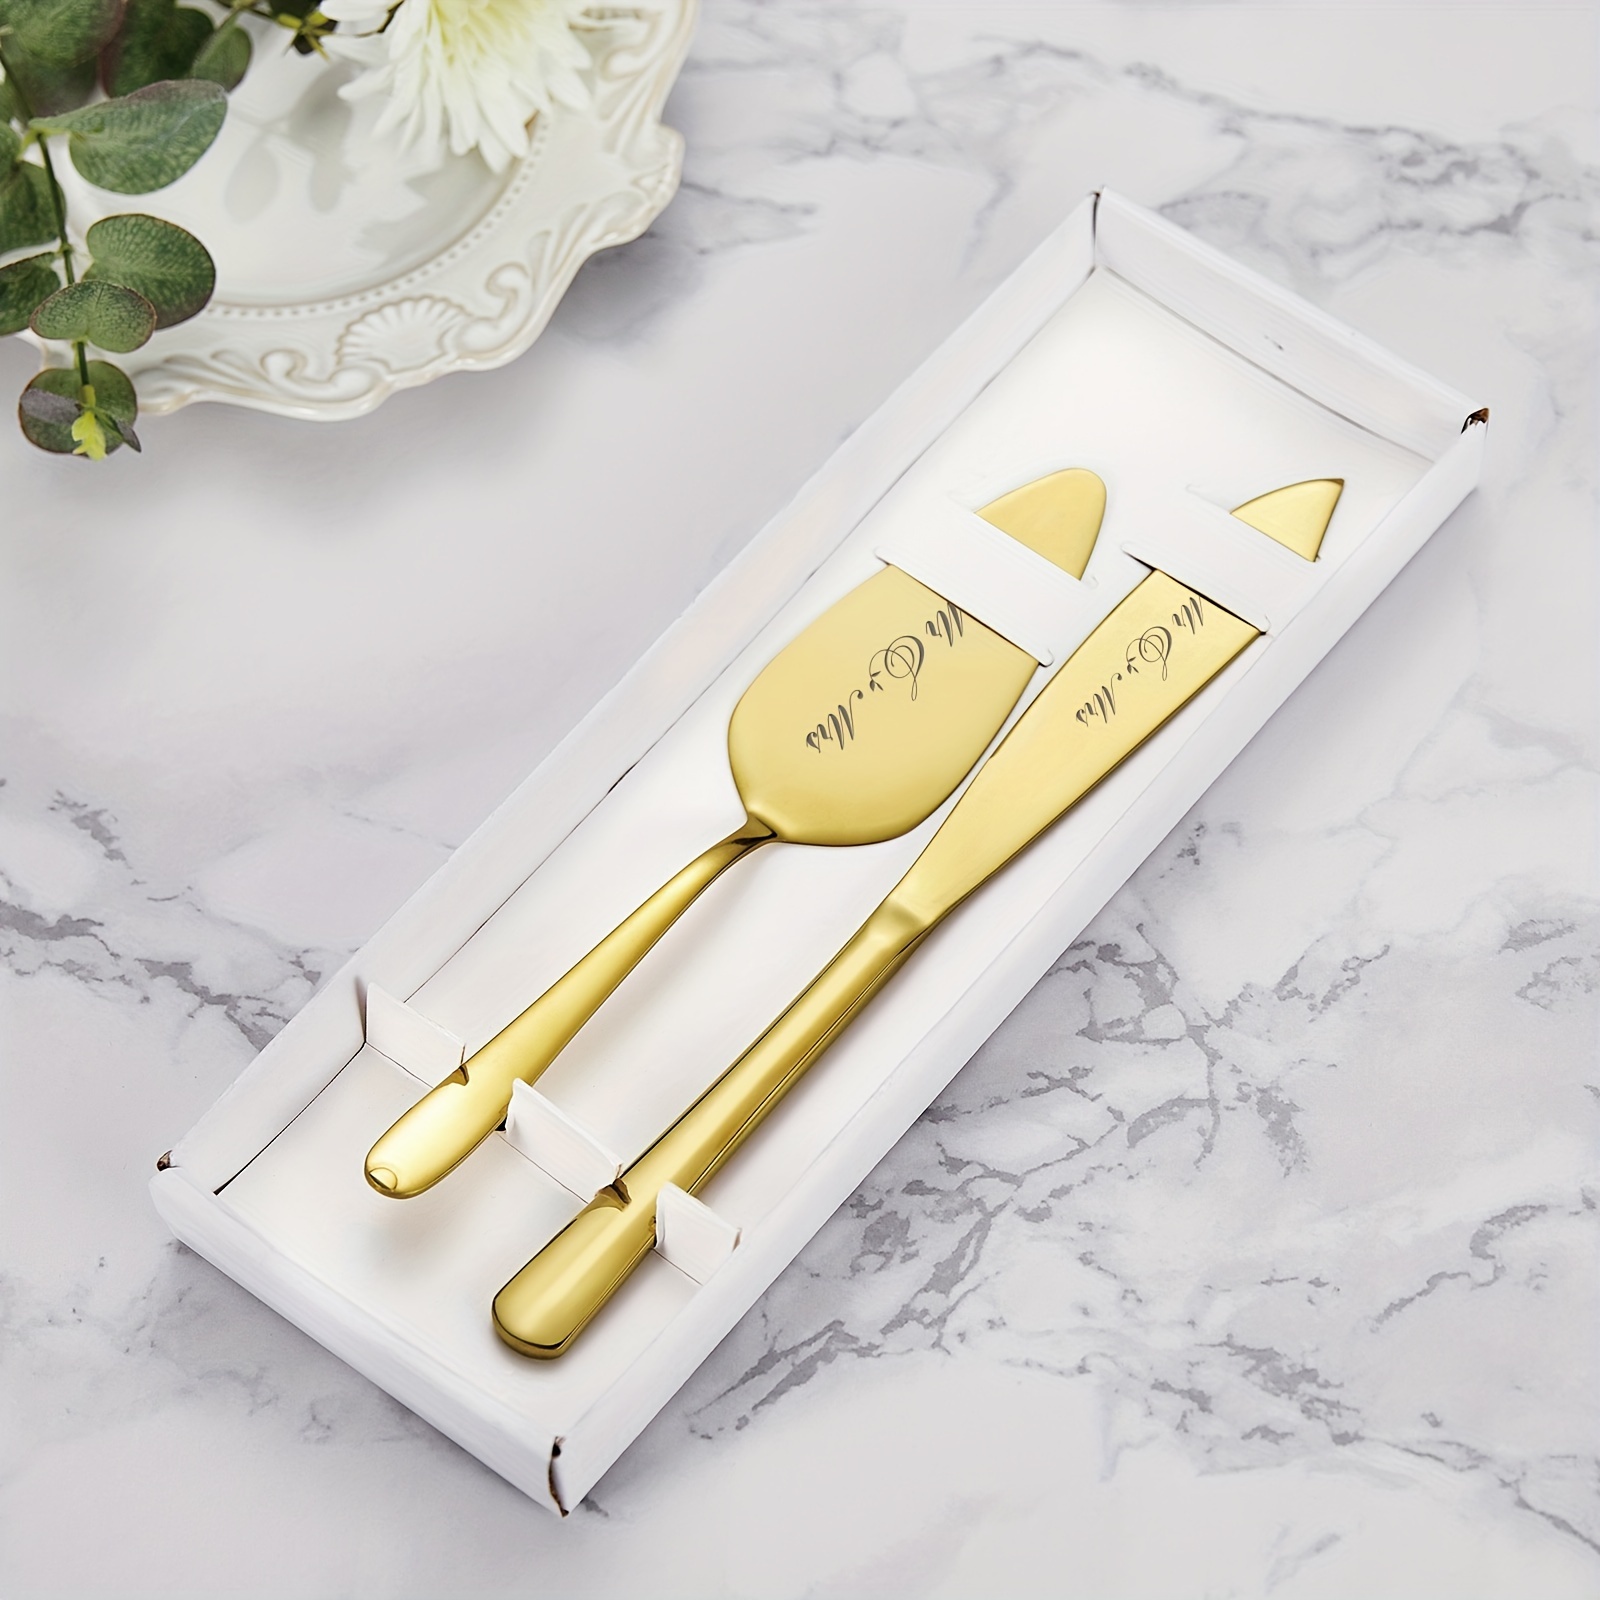 

Aw Bridal Wedding Cake Knife And Server Set, Cake Cutting Set For Wedding, Stainless Steel Cake Pie Serving Set Gift For Anniversary Birthday Parties